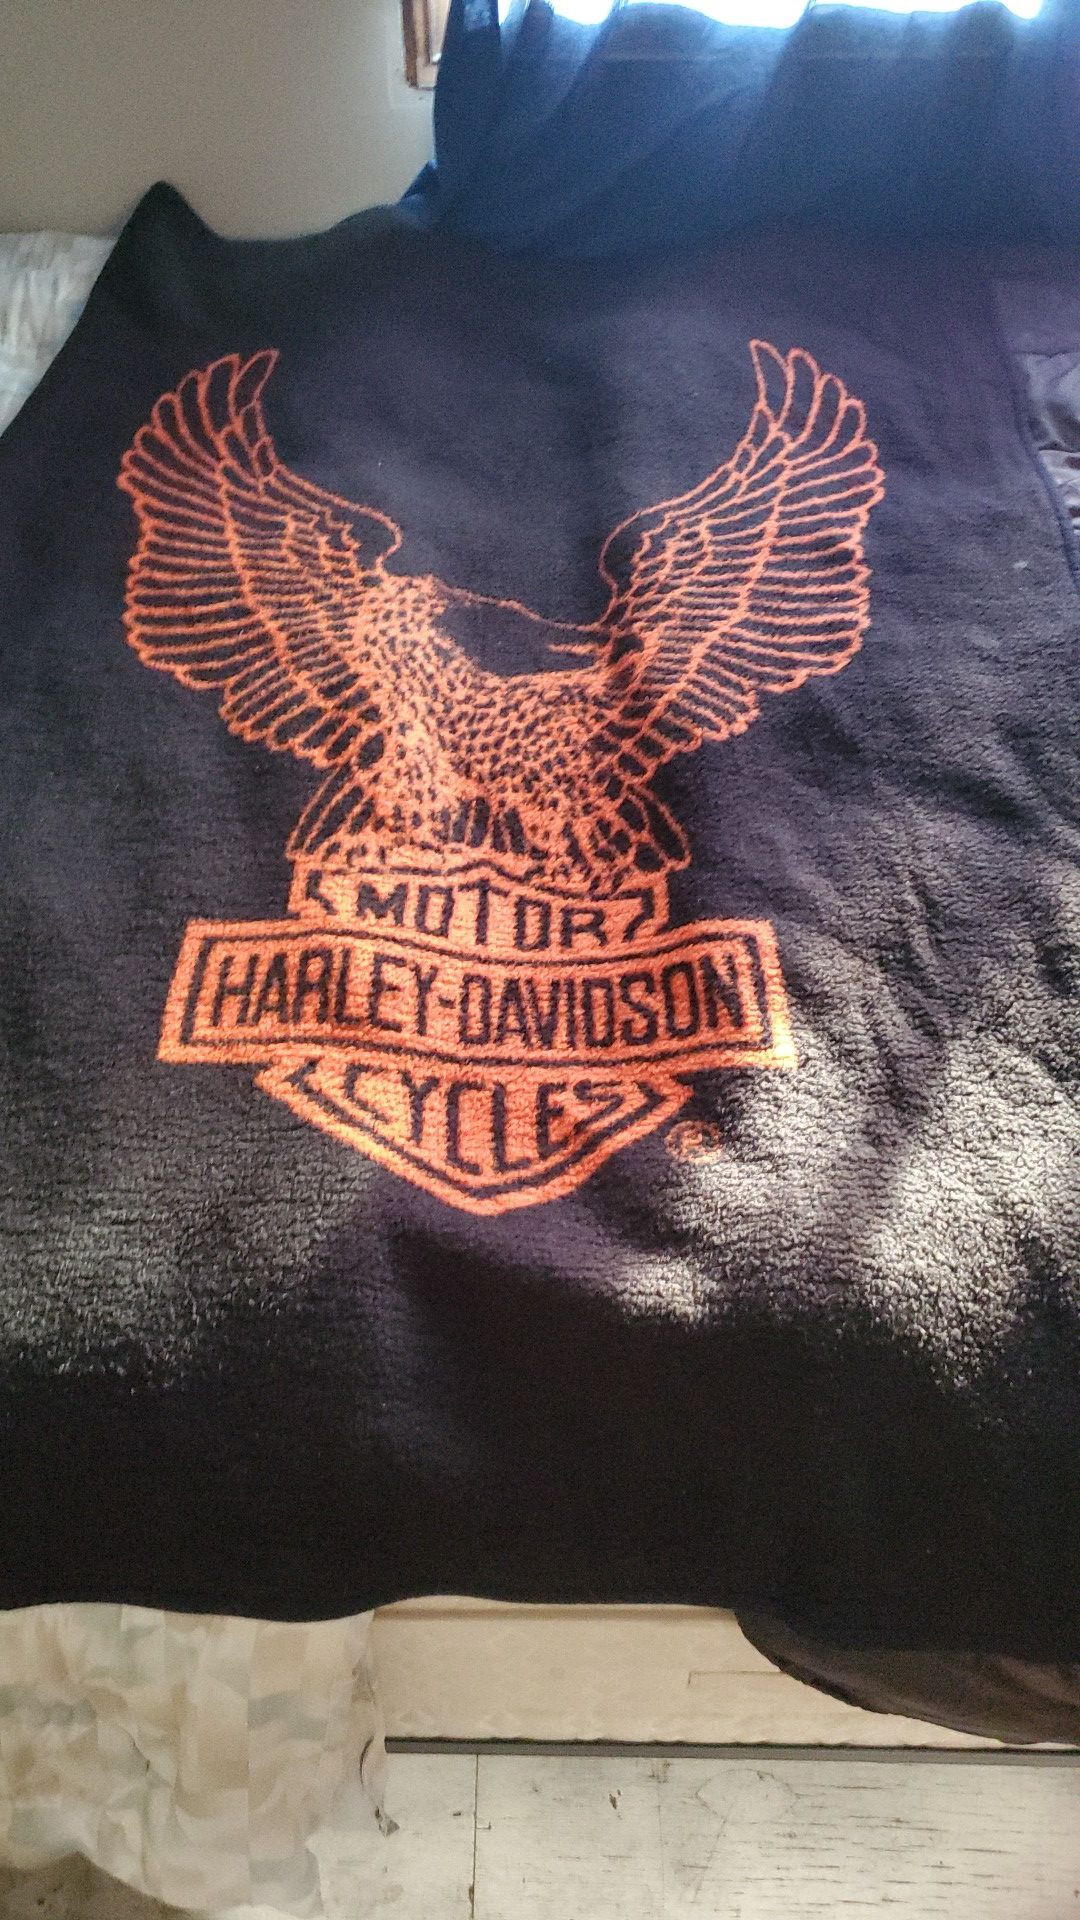 Harley's Davidson blanket very nice never used only a wall hanging piece in room